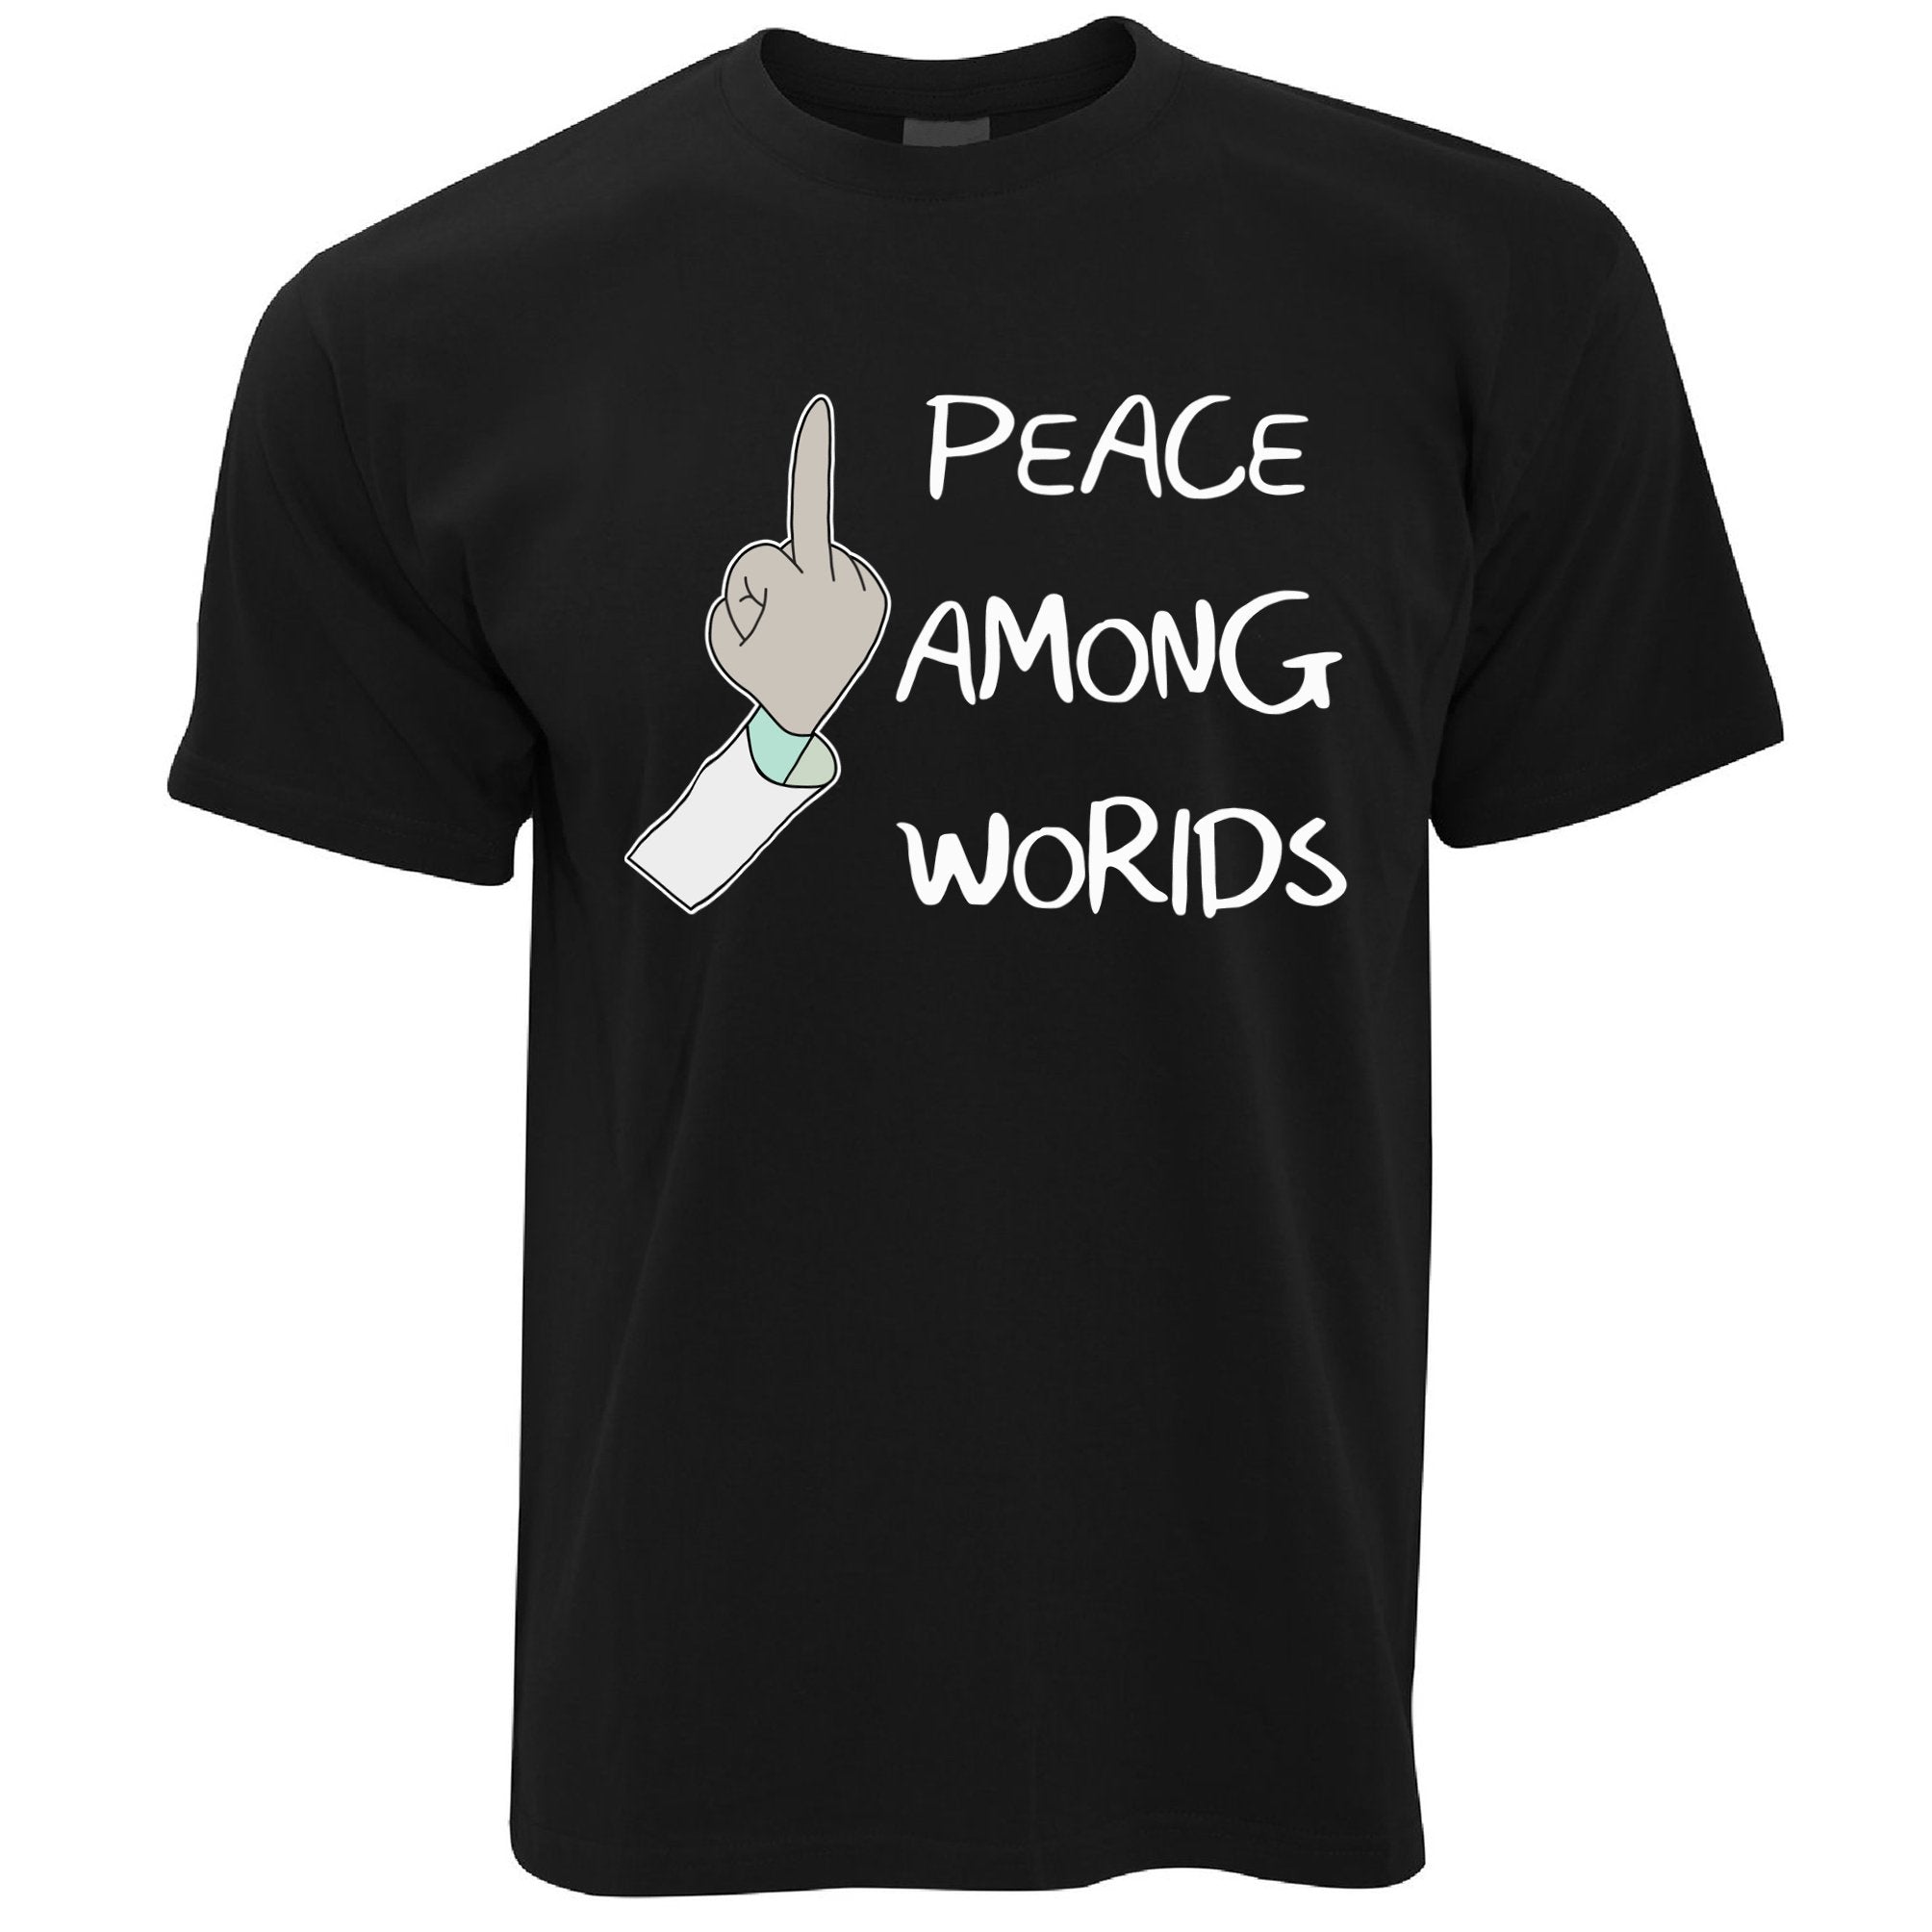 Rick's Peace Among Worlds T Shirt Inspired By Rick and Morty